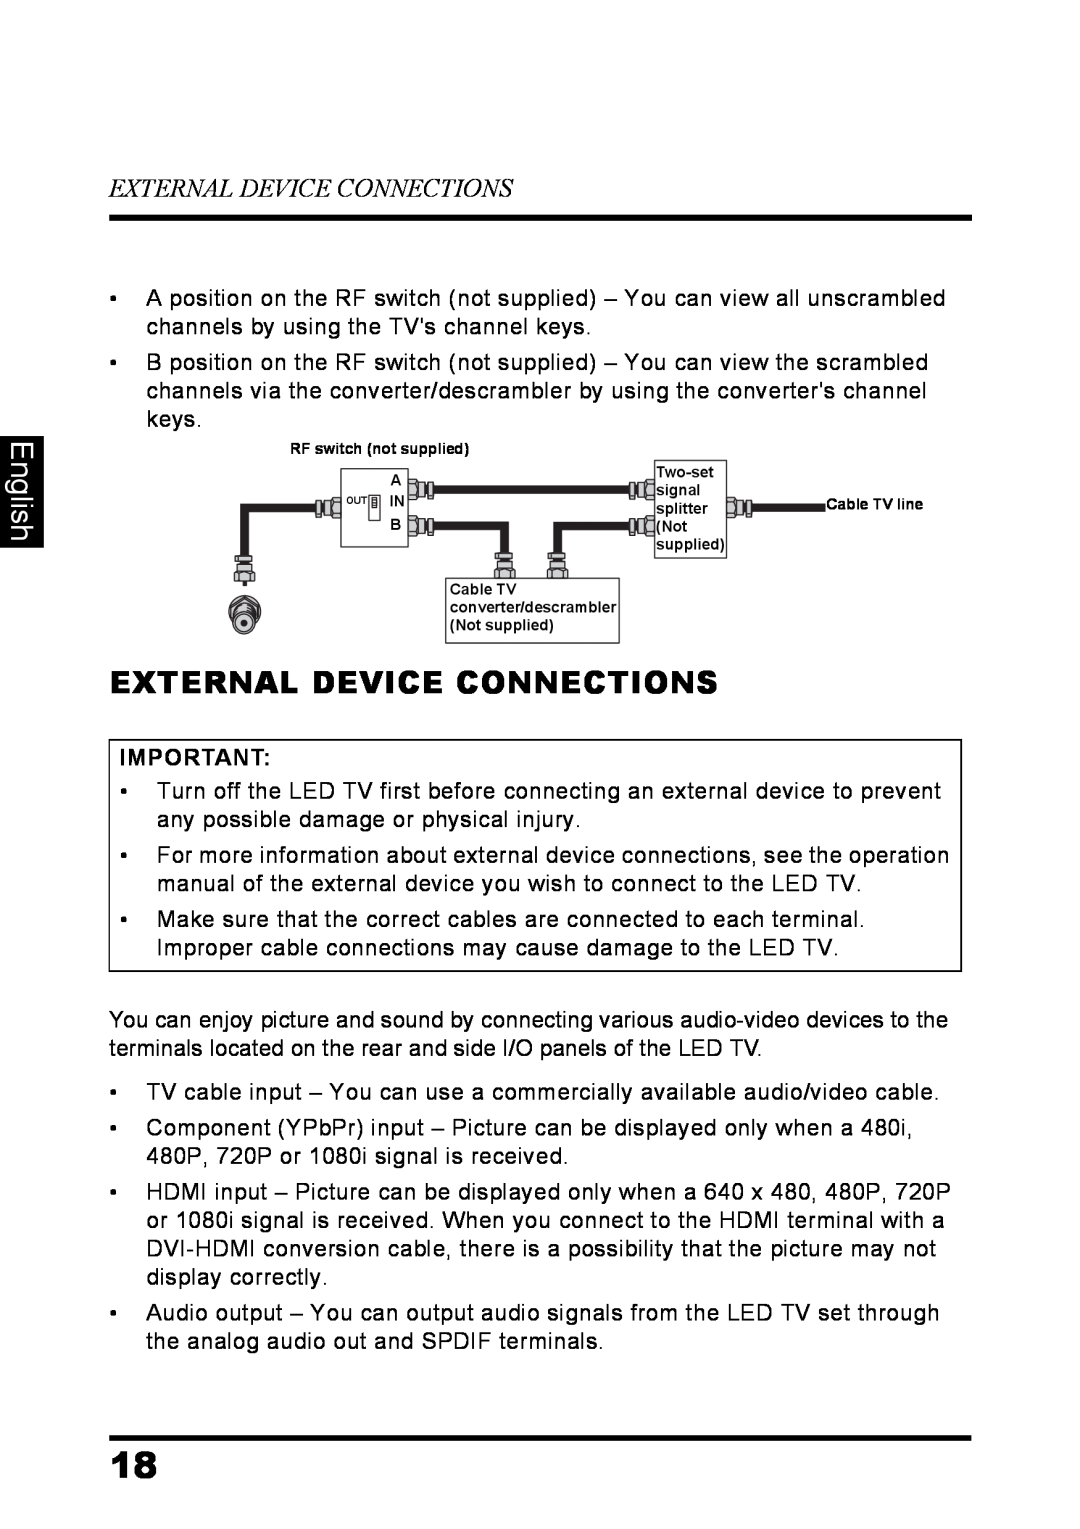 Westinghouse LD-3237 user manual External Device Connections, English 